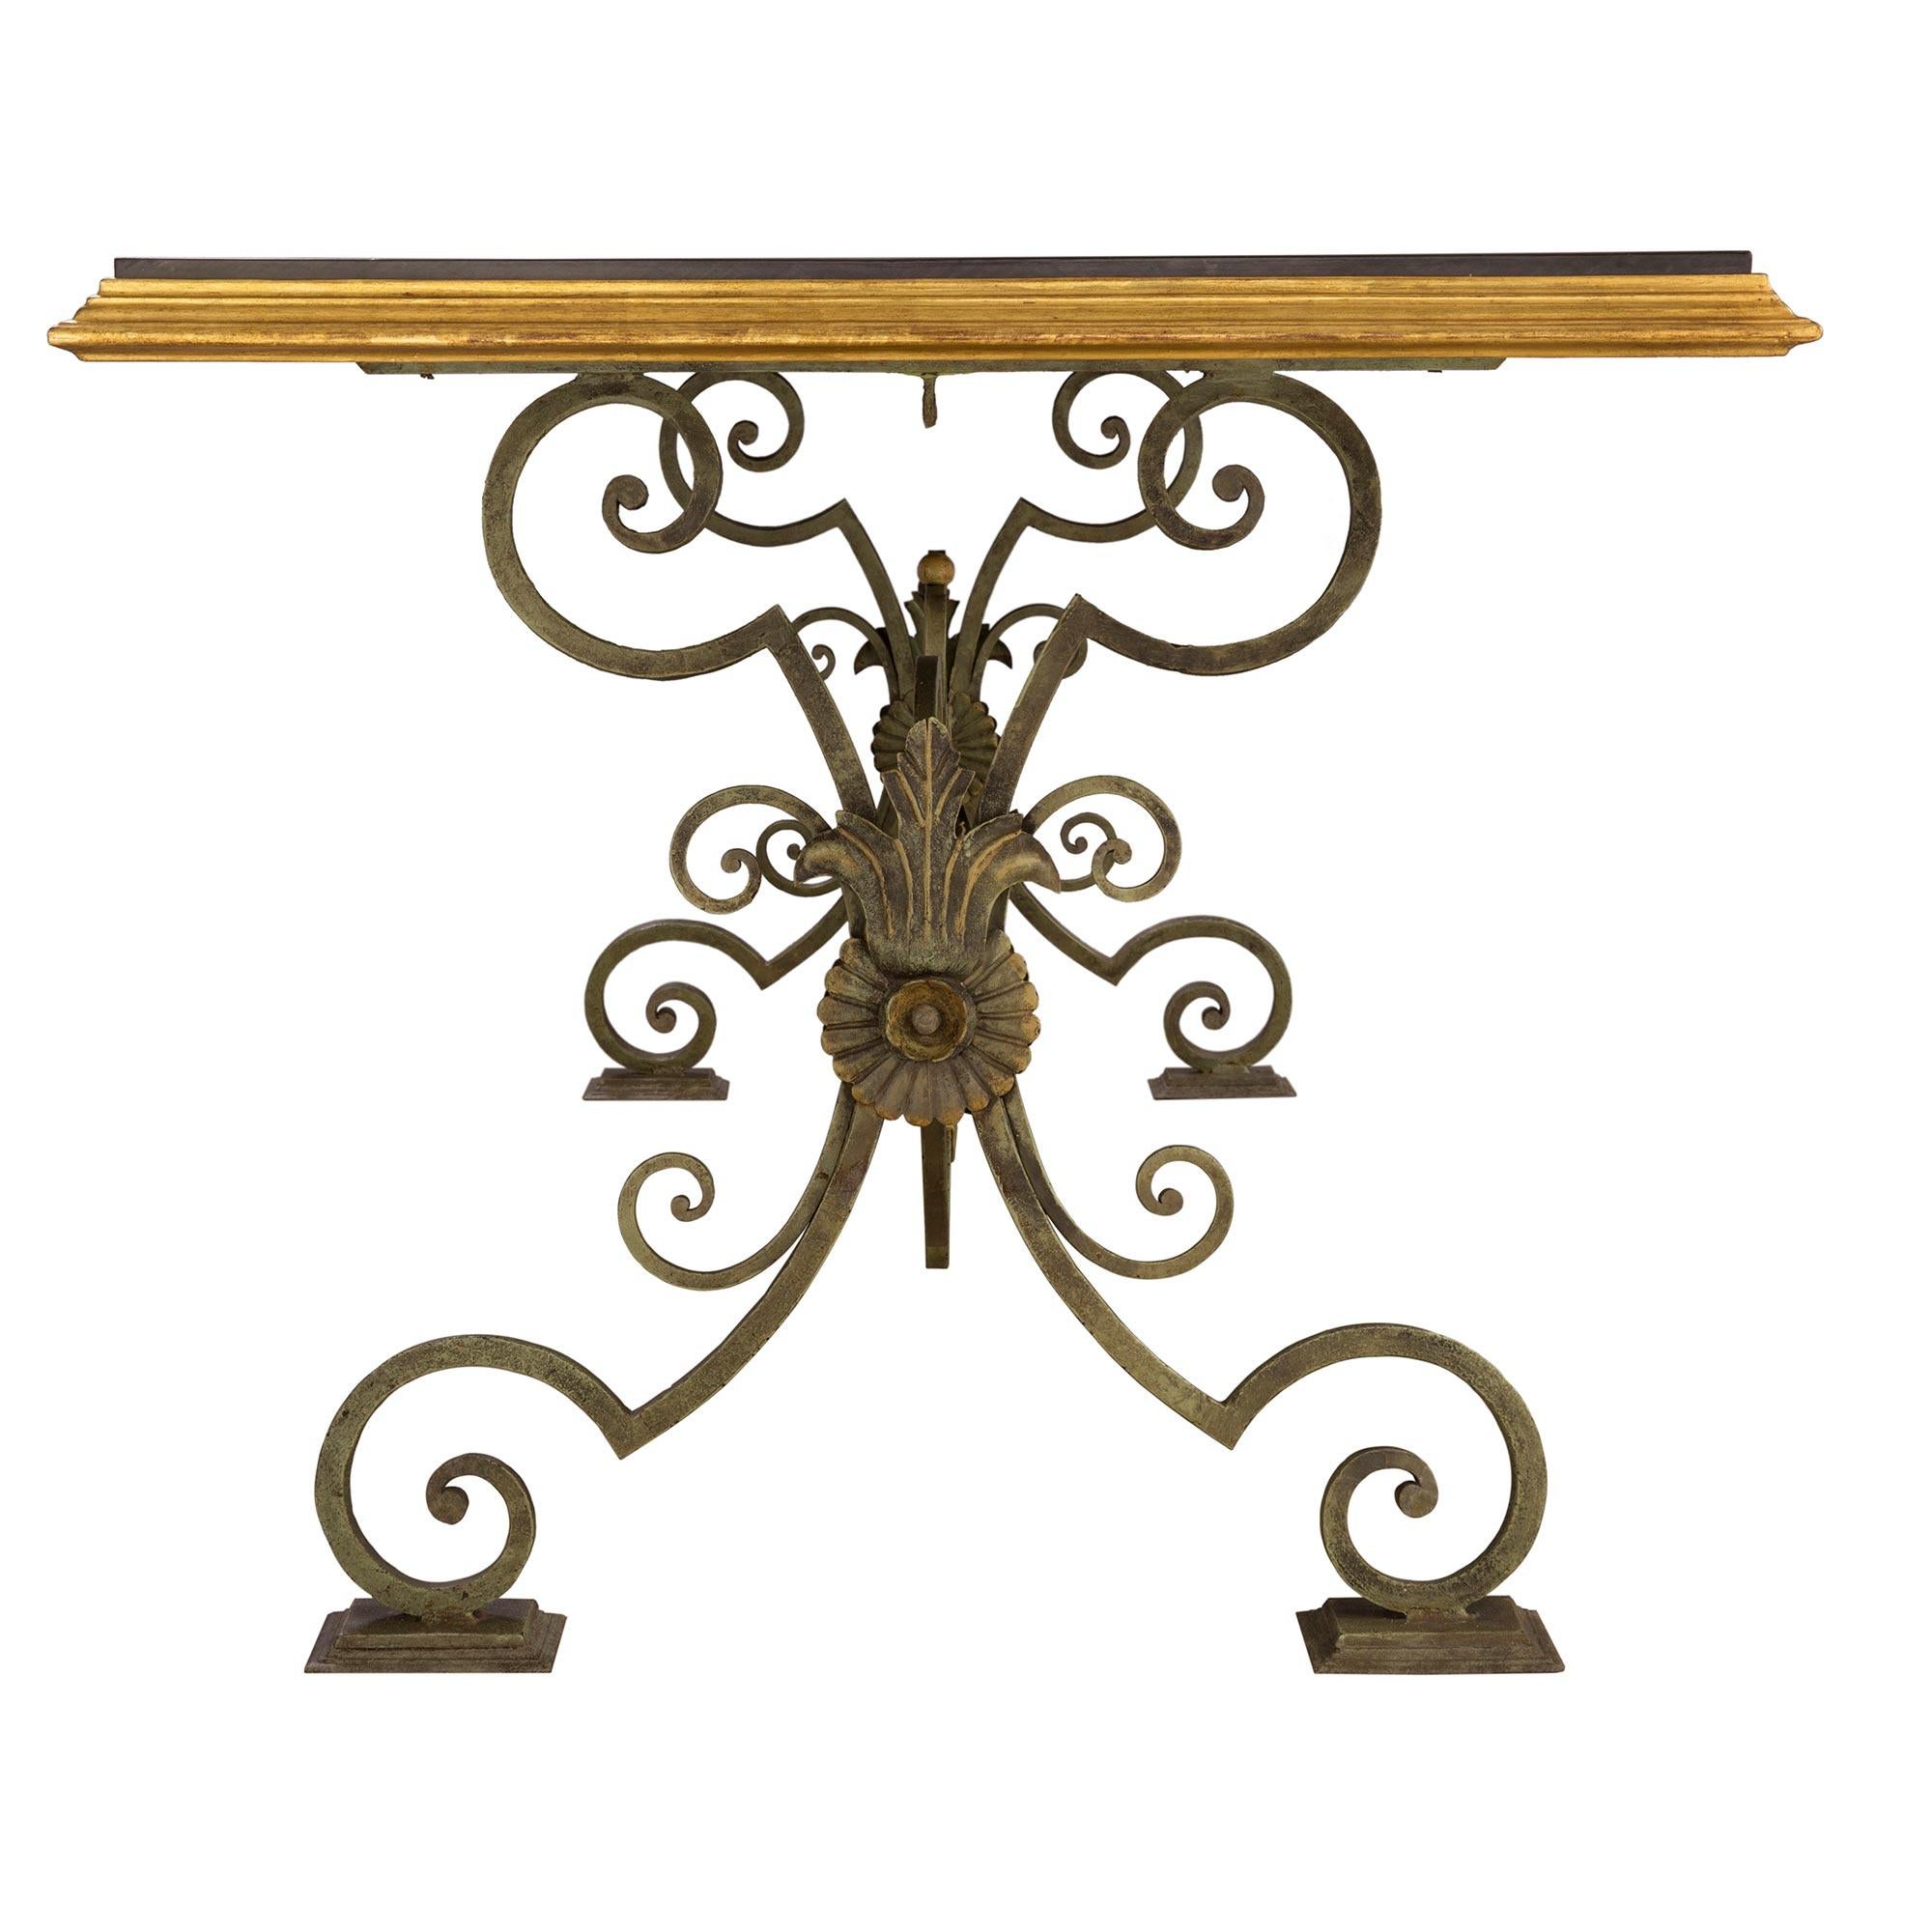 Italian 19th Century Wrought Iron, Giltwood and Scagliola Center or Dining Table For Sale 2